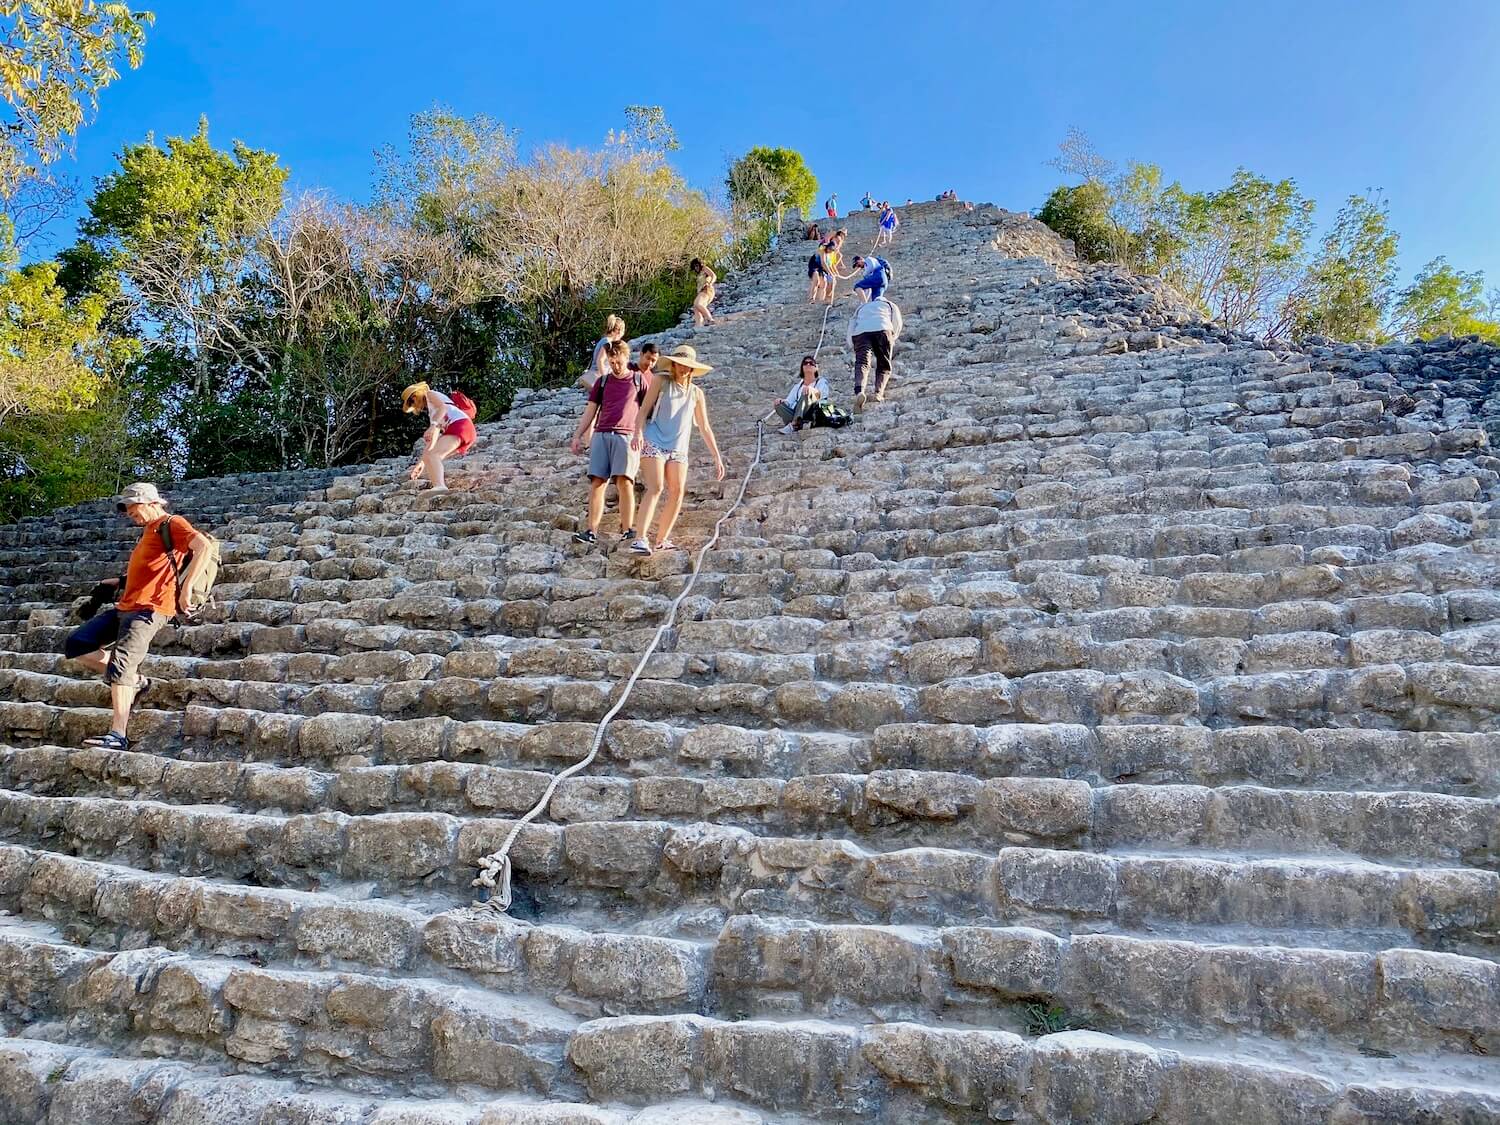 The highest pyramid amongst the ancient mayan ruins of Coba, viewing from the ground level up the hundred limestone steps leading up to the top of the structure.  There is a secure rope in the center of the steps with a dozen tourists making their way up and down.  Behind the pyramid are jungle trees with blue sky. 